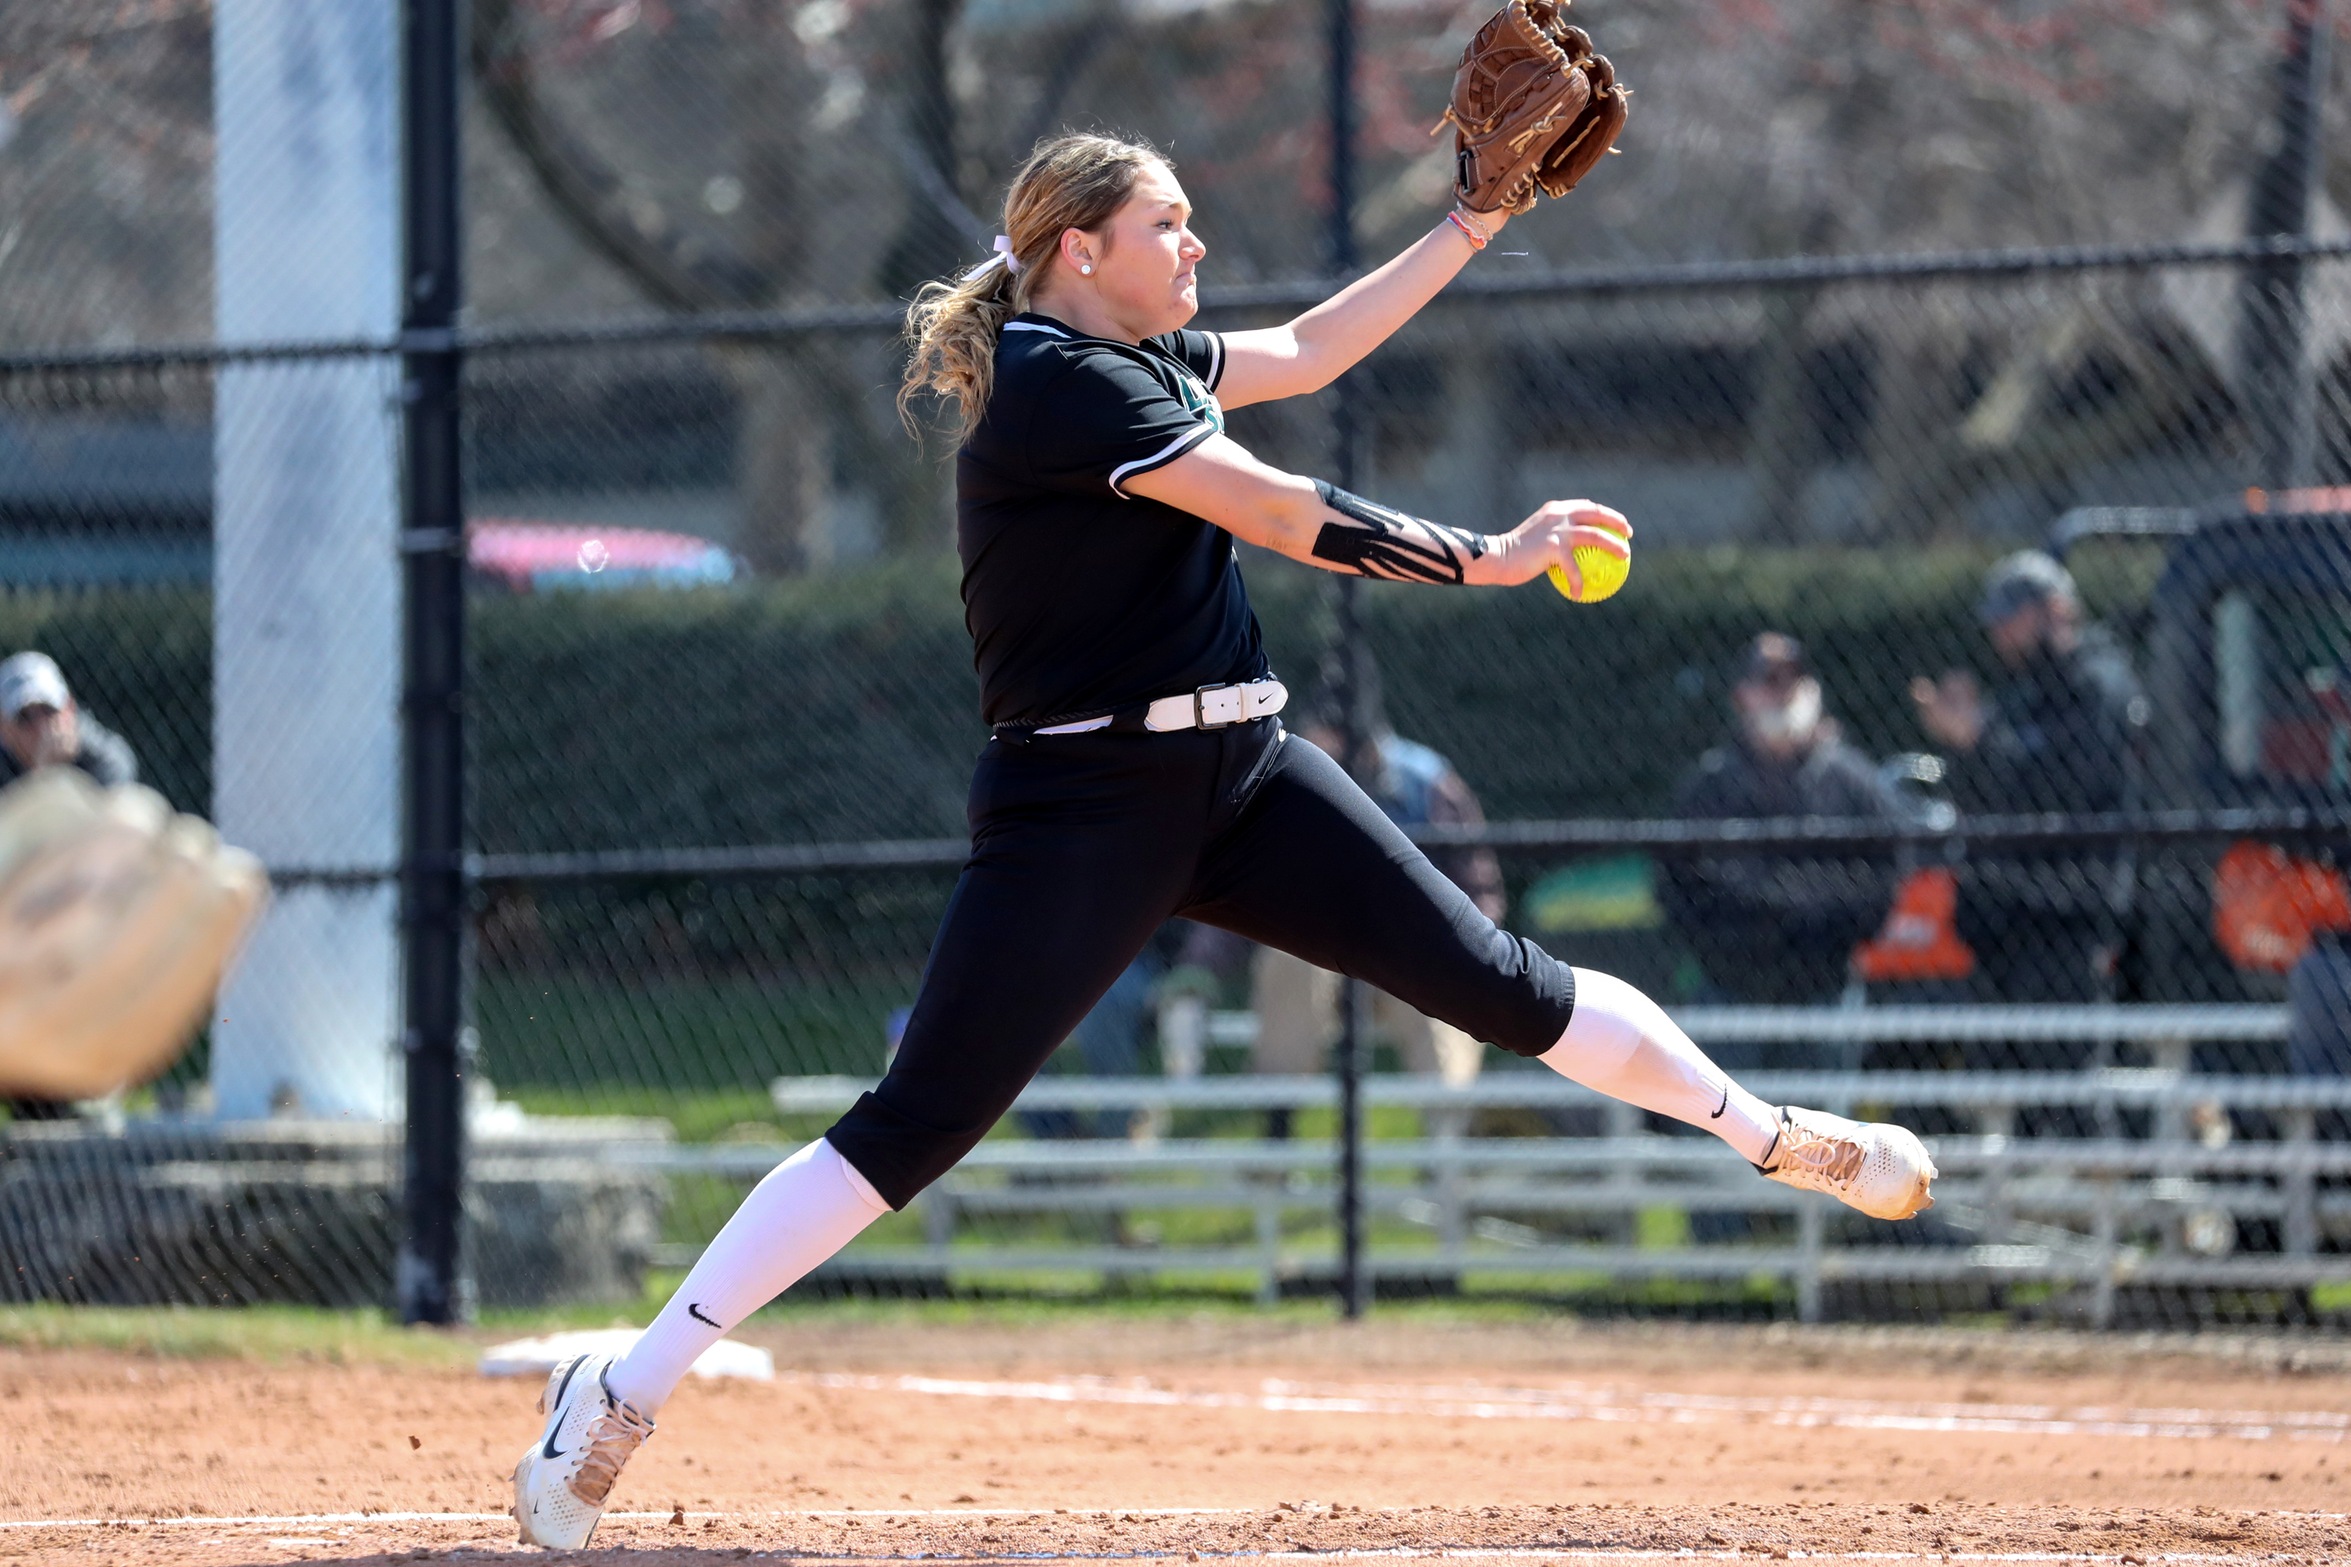 Cleveland State Softball Earns Series Win with Doubleheader Split